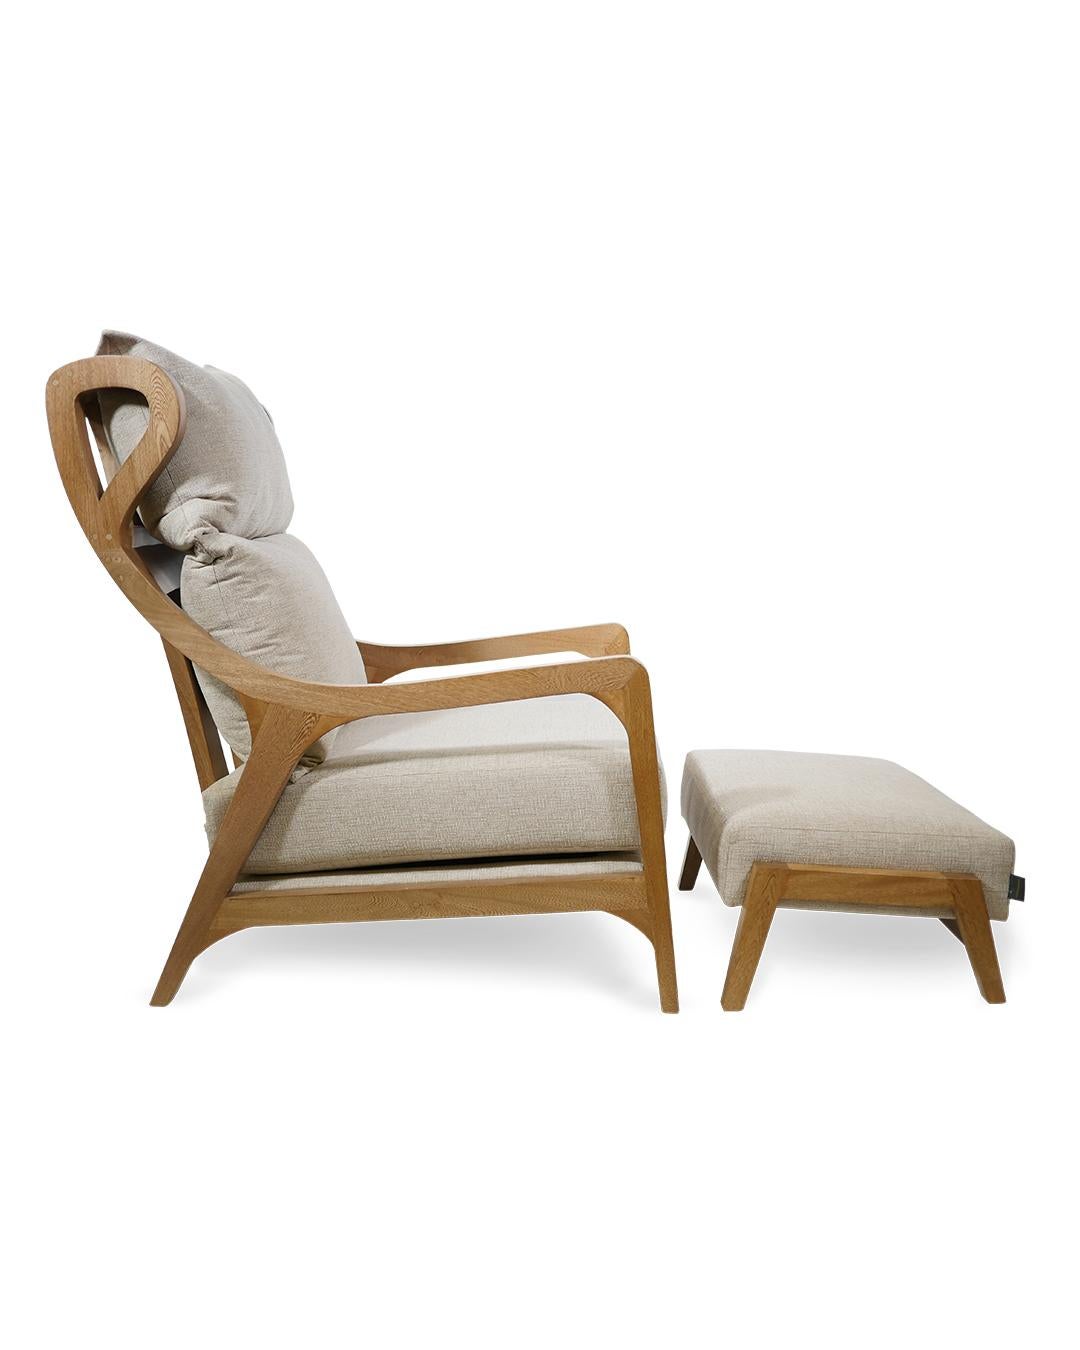 A modern armchair ideal for just relaxing, reading or taking a nap. 
The woodwork is beautiful and it will look awesome in your living room or bedroom. Please note that this armchair is really high, it has been designed to fit not so tall people